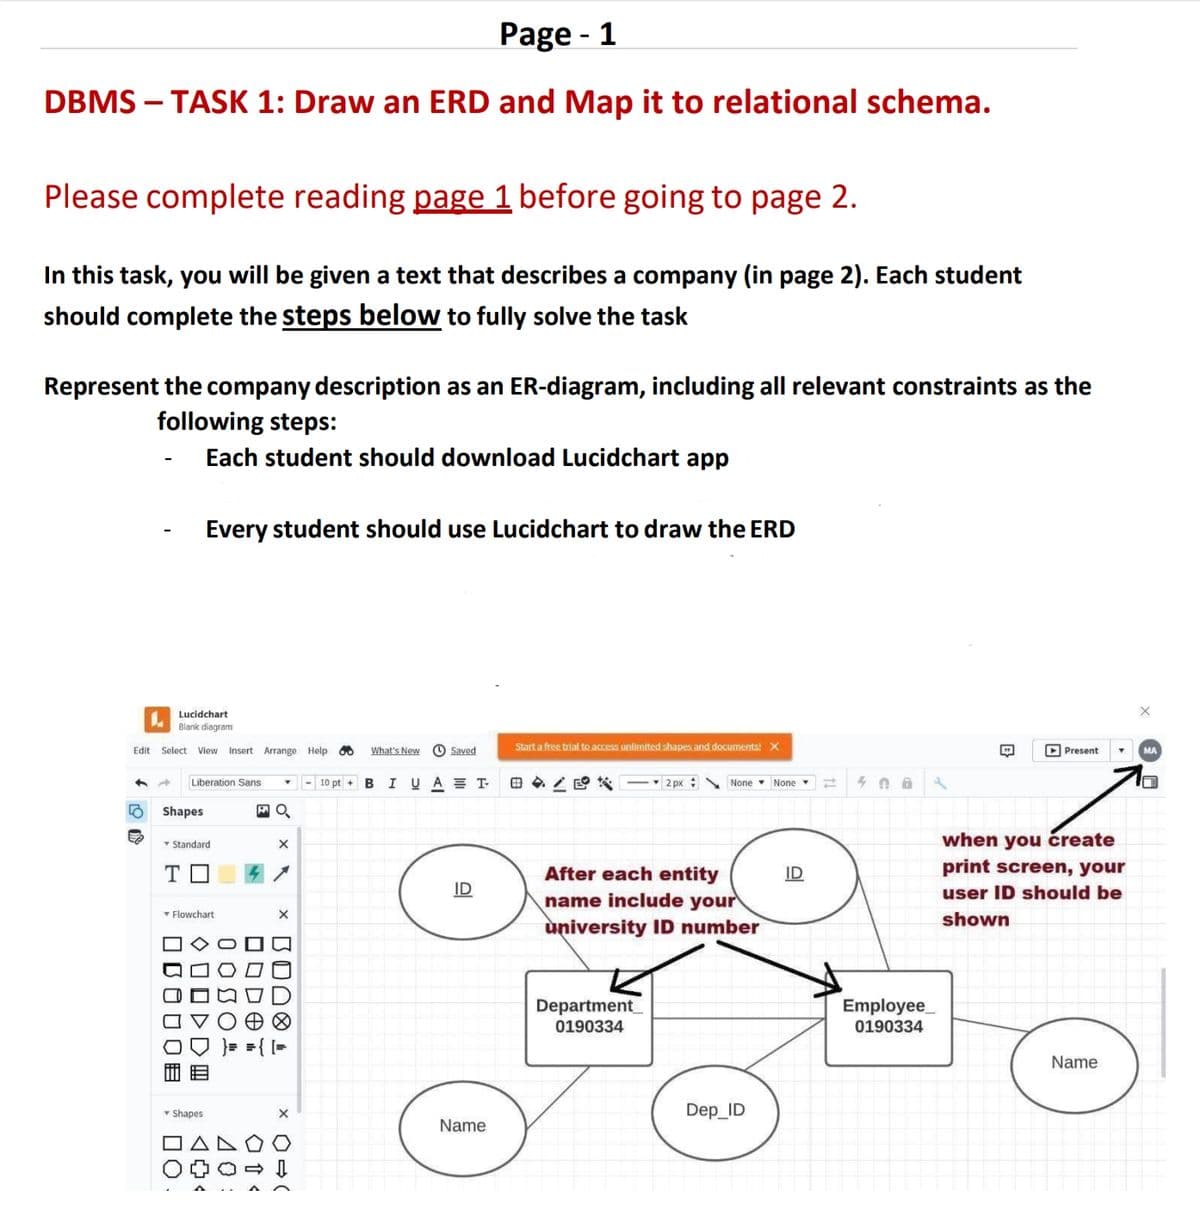 Page - 1
DBMS - TASK 1: Draw an ERD and Map it to relational schema.
Please complete reading page 1 before going to page 2.
In this task, you will be given a text that describes a company (in page 2). Each student
should complete the steps below to fully solve the task
Represent the company description as an ER-diagram, including all relevant constraints as the
following steps:
-
Each student should download Lucidchart app
Every student should use Lucidchart to draw the ERD
Edit
Lucidchart
Blank diagram
Select View Insert Arrange Help
80
What's New
Saved
Start a free trial to access unlimited shapes and documents! X
BIUAT-
2 px None None
408
Liberation Sans
▾
10 pt +
Shapes
O
Standard
×
T
Flowchart
000
☐ ODOT
☐ ☐ ☐ ☐ ☐☐
)>0 ×
TU Xx
14
<<
ΔΟ
▼ Shapes
ΠΑ
☐ ☐
Name
B
Present
MA
when you create
After each entity
ID
print screen, your
name include your
user ID should be
shown
university ID number
Department
0190334
Dep_ID
Employee
0190334
Name